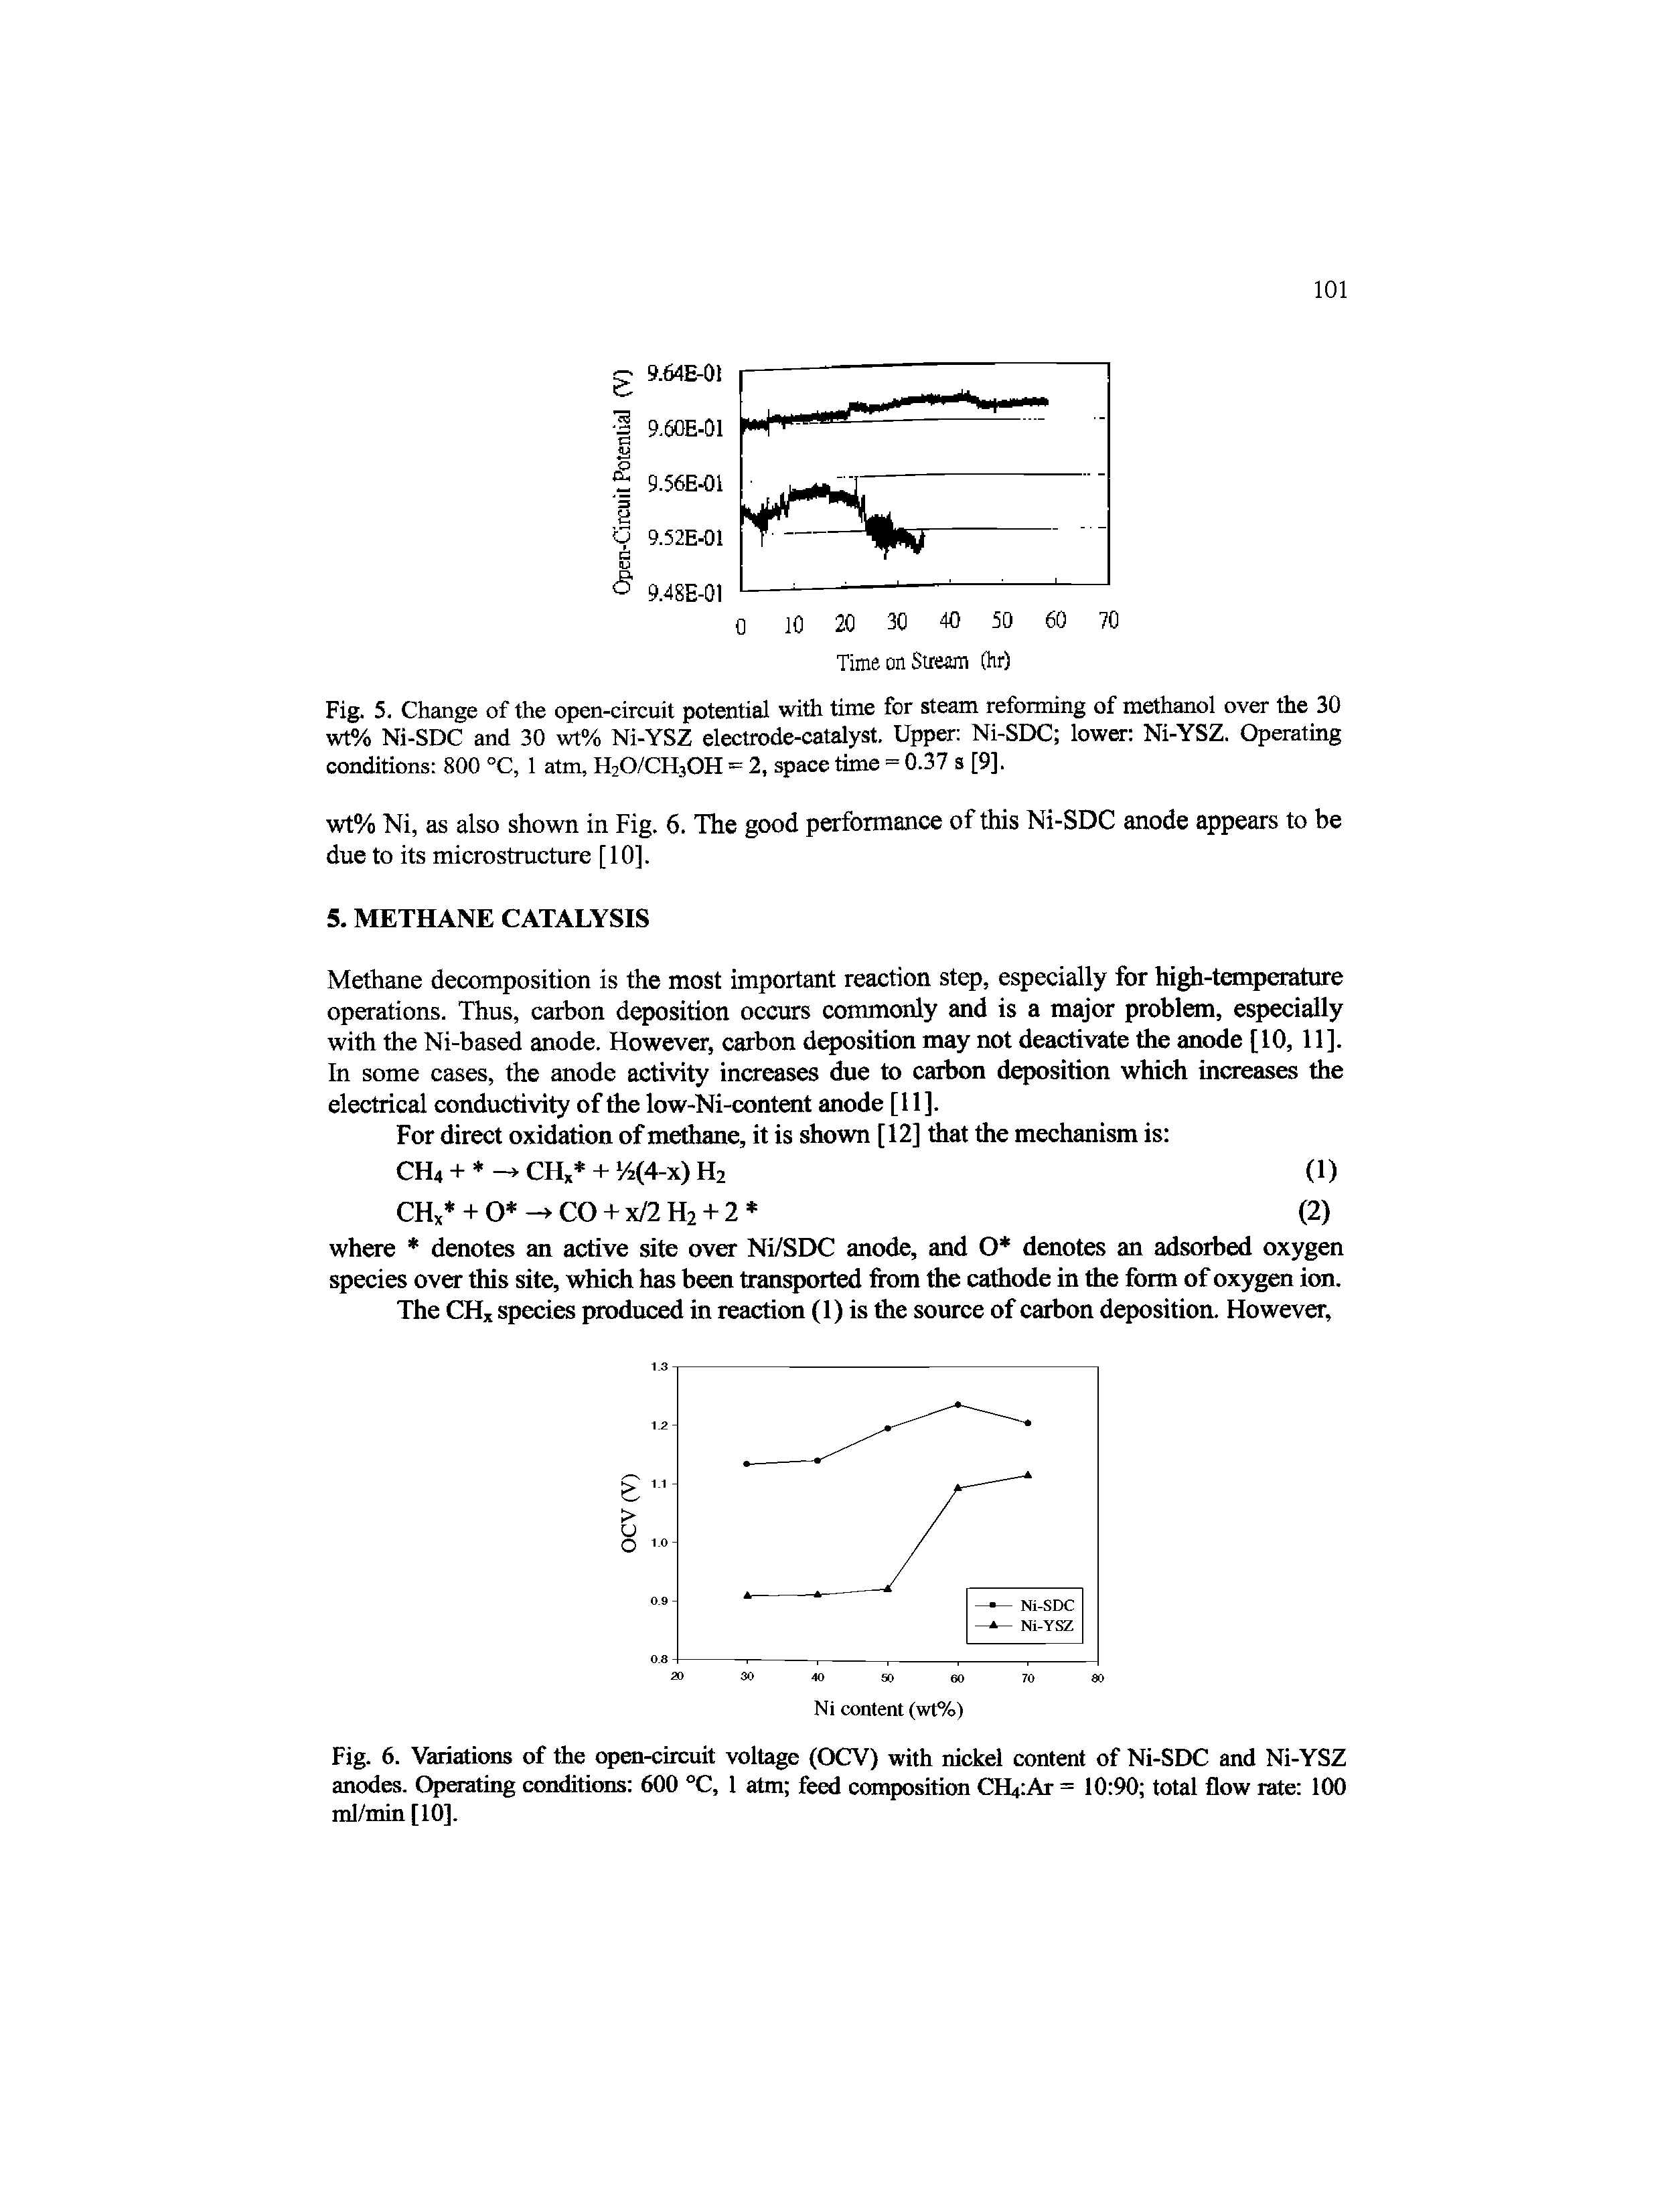 Fig. 5. Change of the open-circuit potential with time for steam reforming of methanol over the 30 wt% Ni-SDC and 30 wt% Ni-YSZ electrode-catalyst. Upper Ni-SDC lower Ni-YSZ. Operating conditions 800 °C, 1 atm, H20/CH30H = 2, space time = 0.37 s [9].